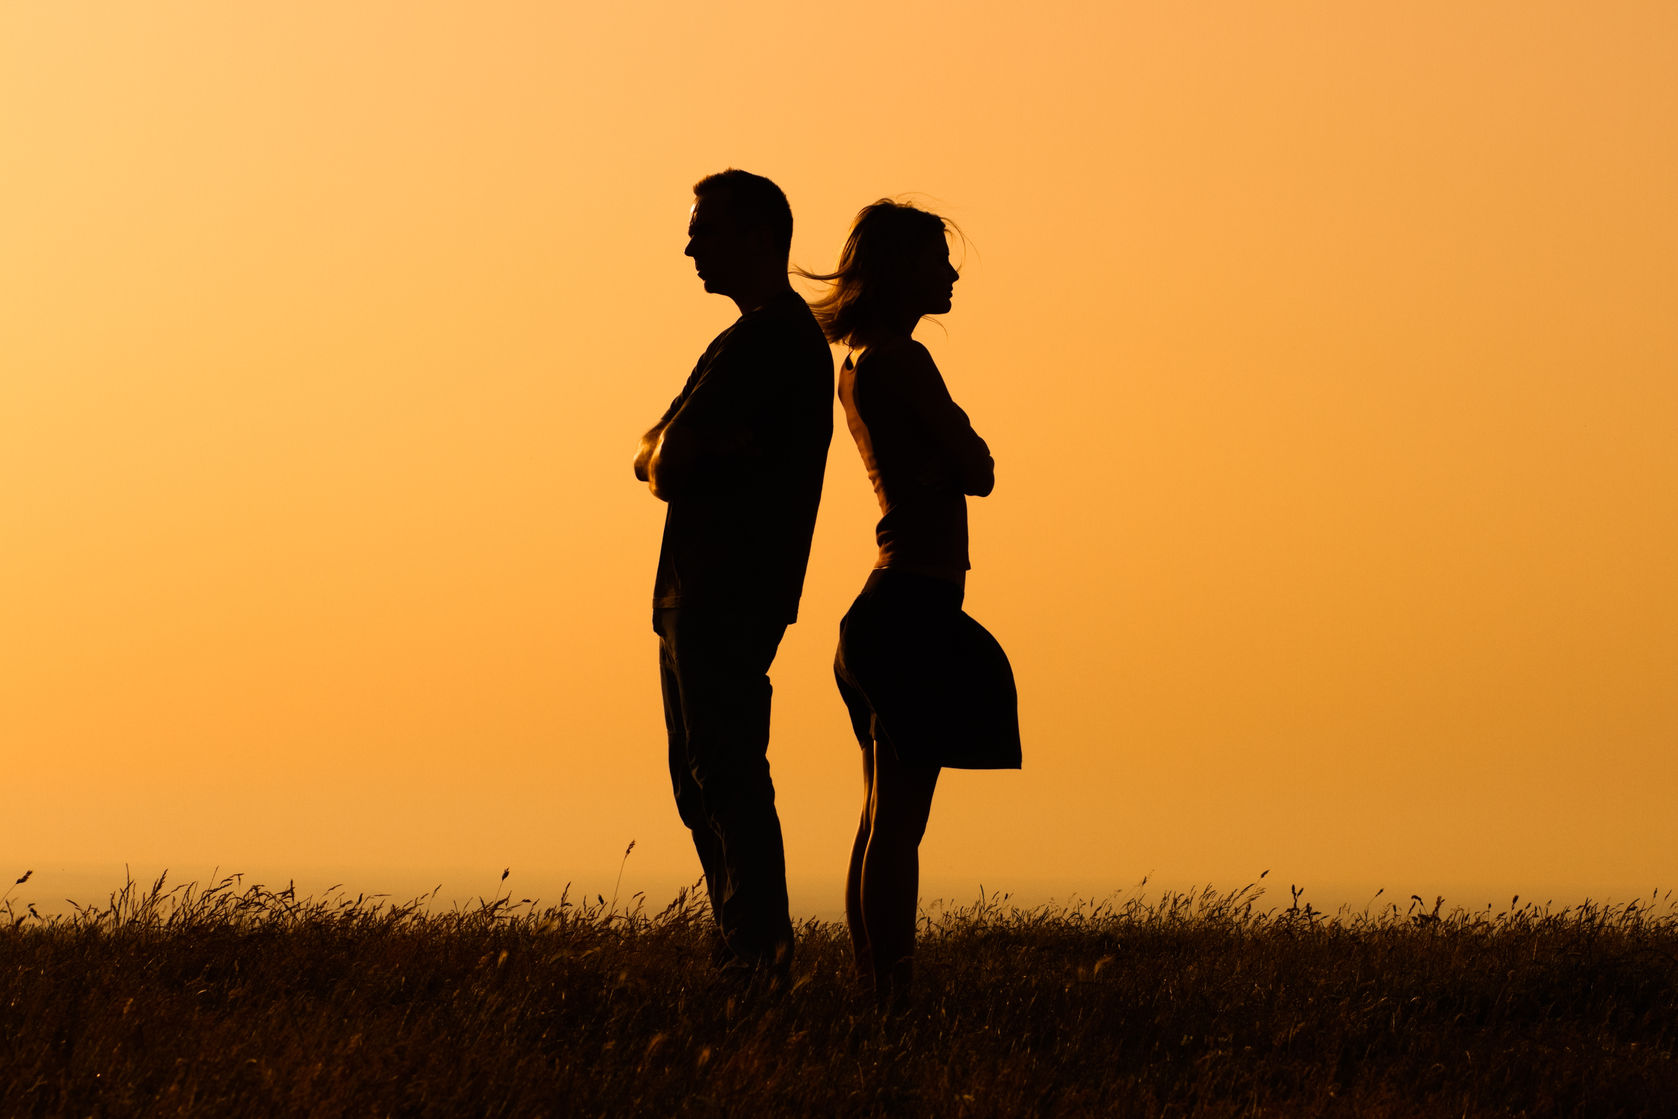 Silhouette of a angry woman and man facing away from each other